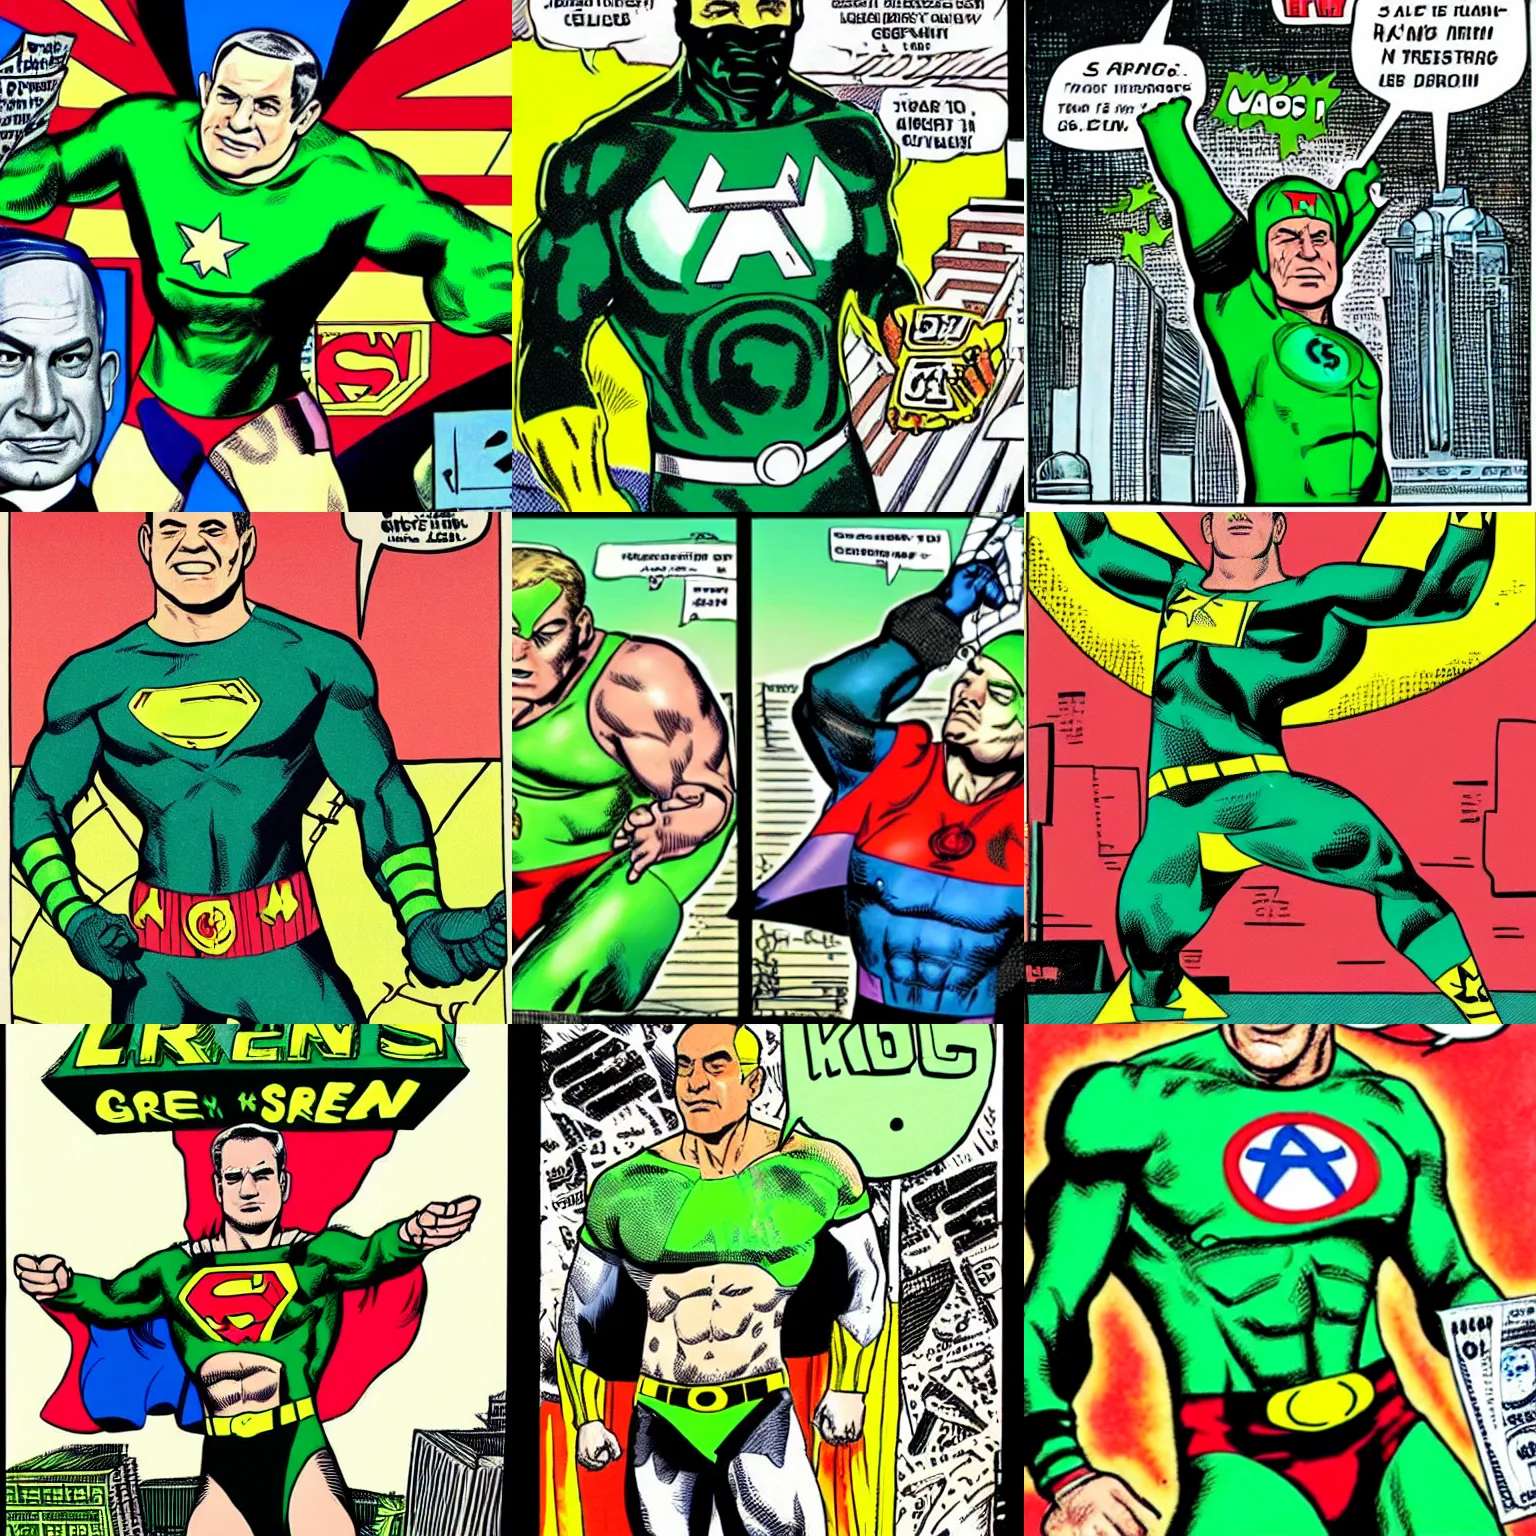 Prompt: Benjamin Netanyahu as a superhero in a green leotard with a dollar sign on his chest, by Jack Kirby, highly detailed